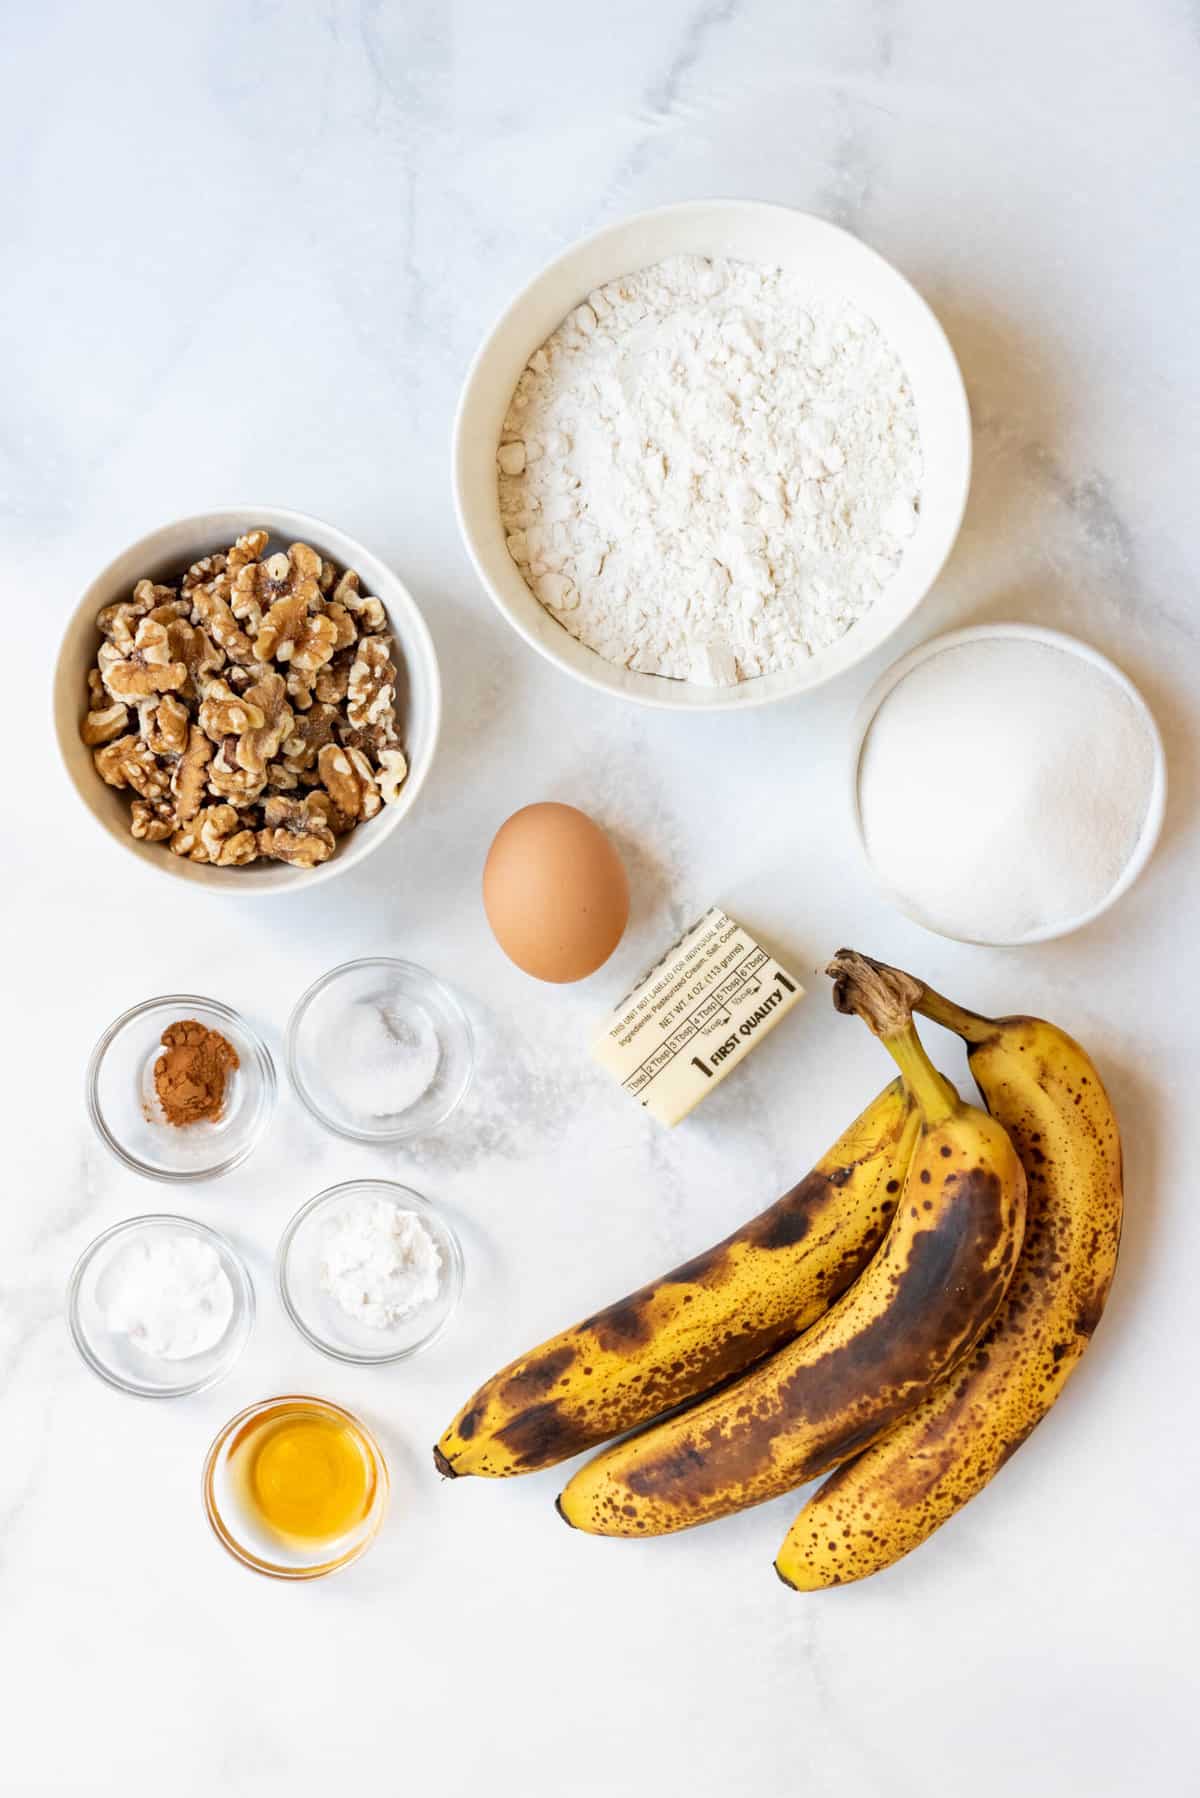 Ingredients for making easy banana bread.